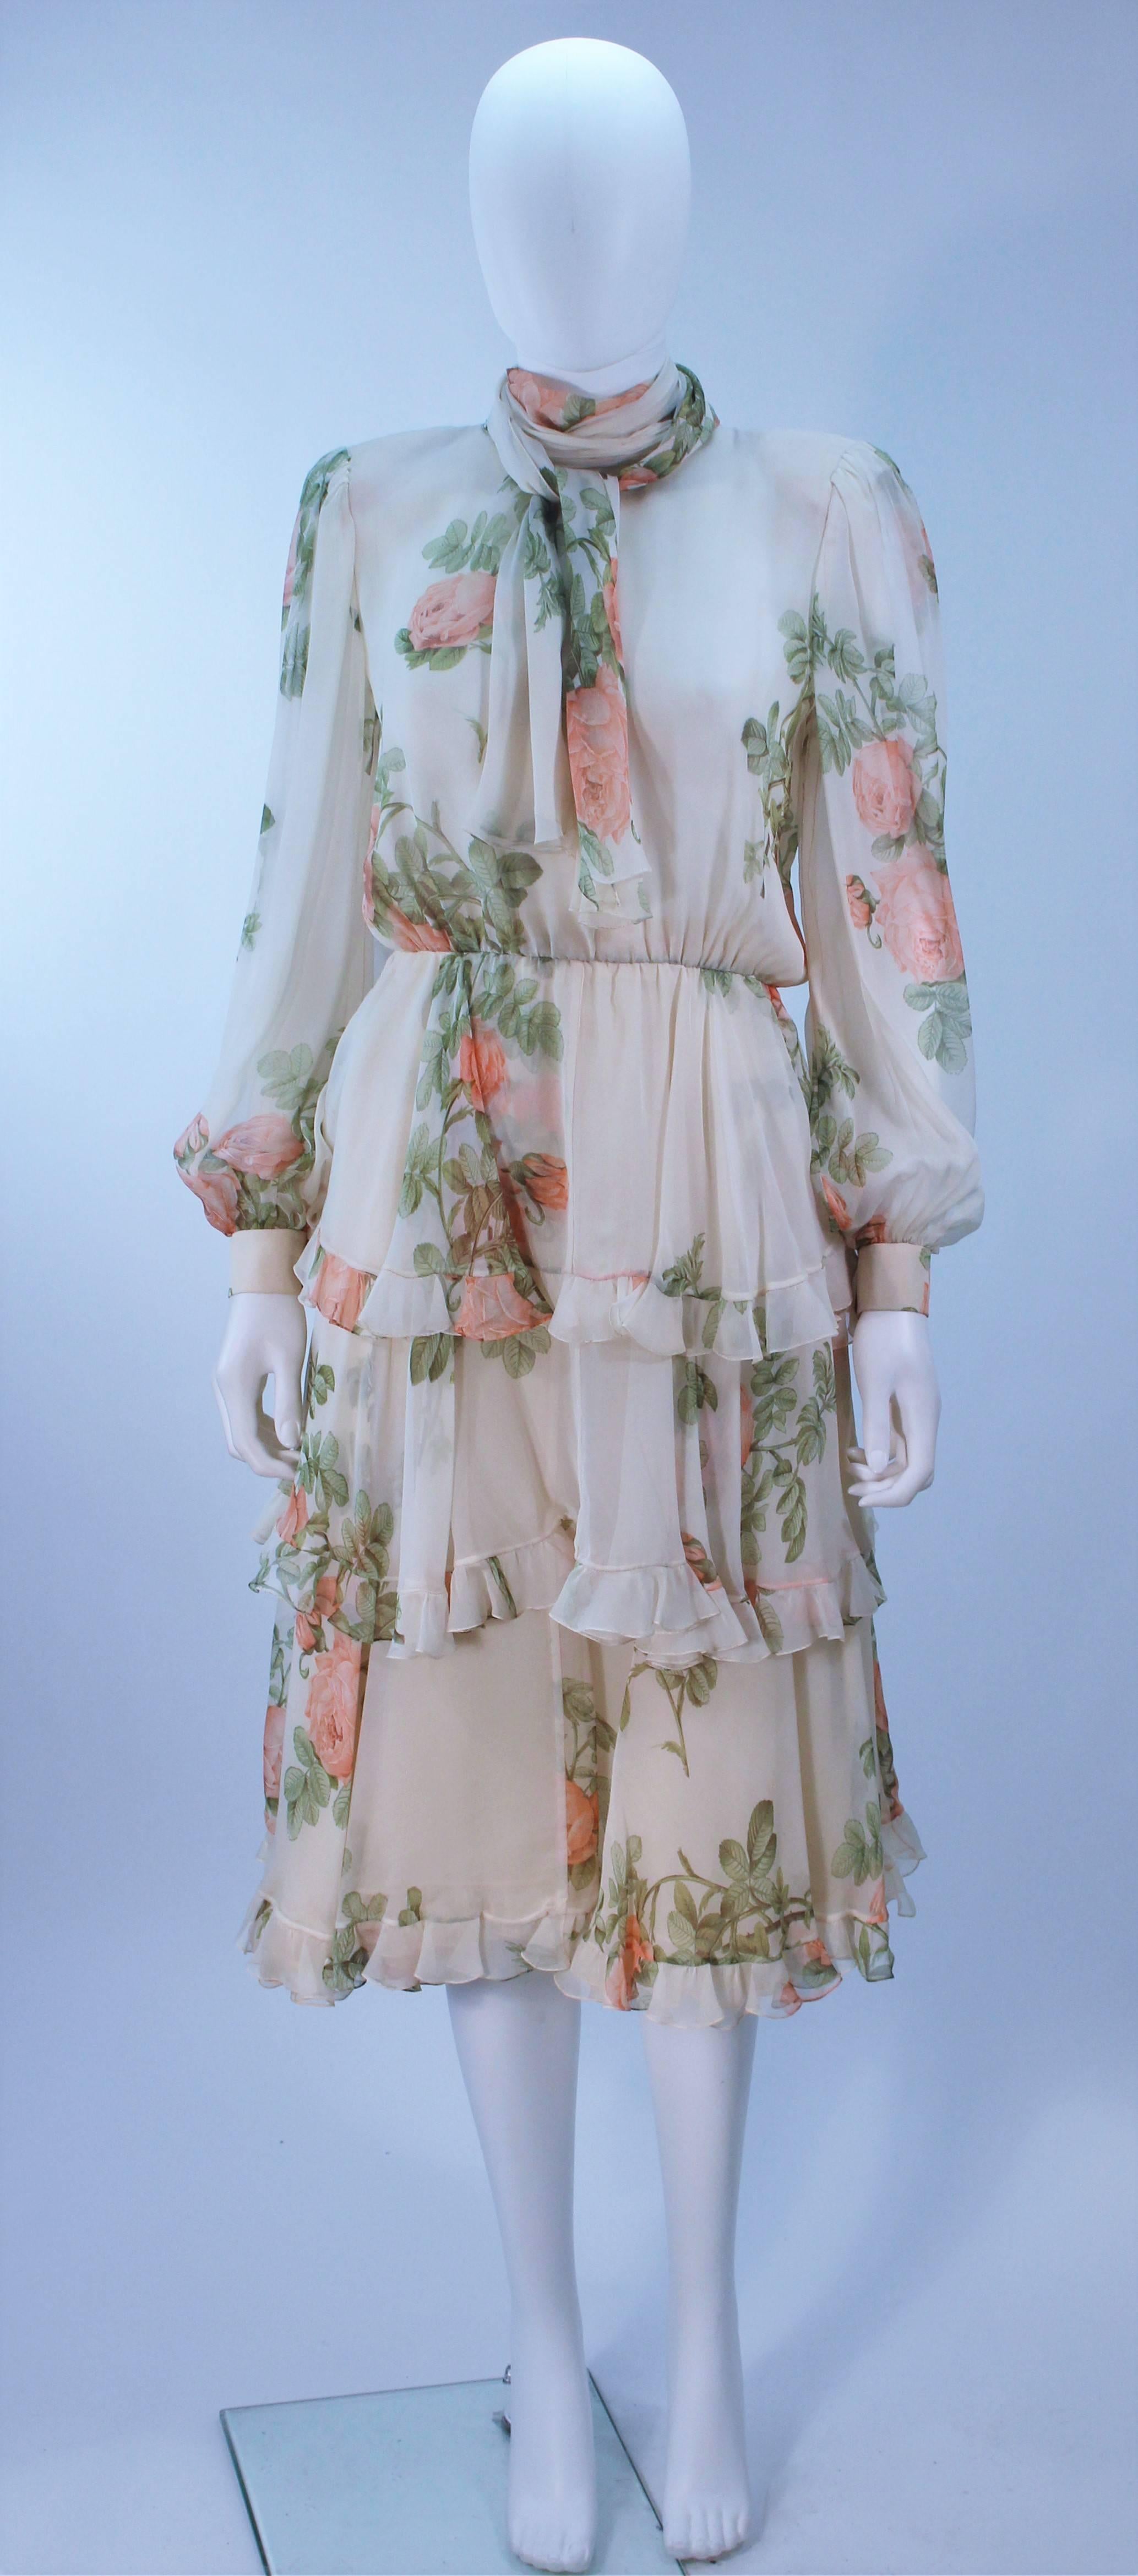  This Valentino design is available for viewing at our Beverly Hills Boutique. We offer a large selection of evening gowns and luxury garments. 

 This skirt set is composed of an off white and pink silk chiffon with a floral pattern, and ruffled